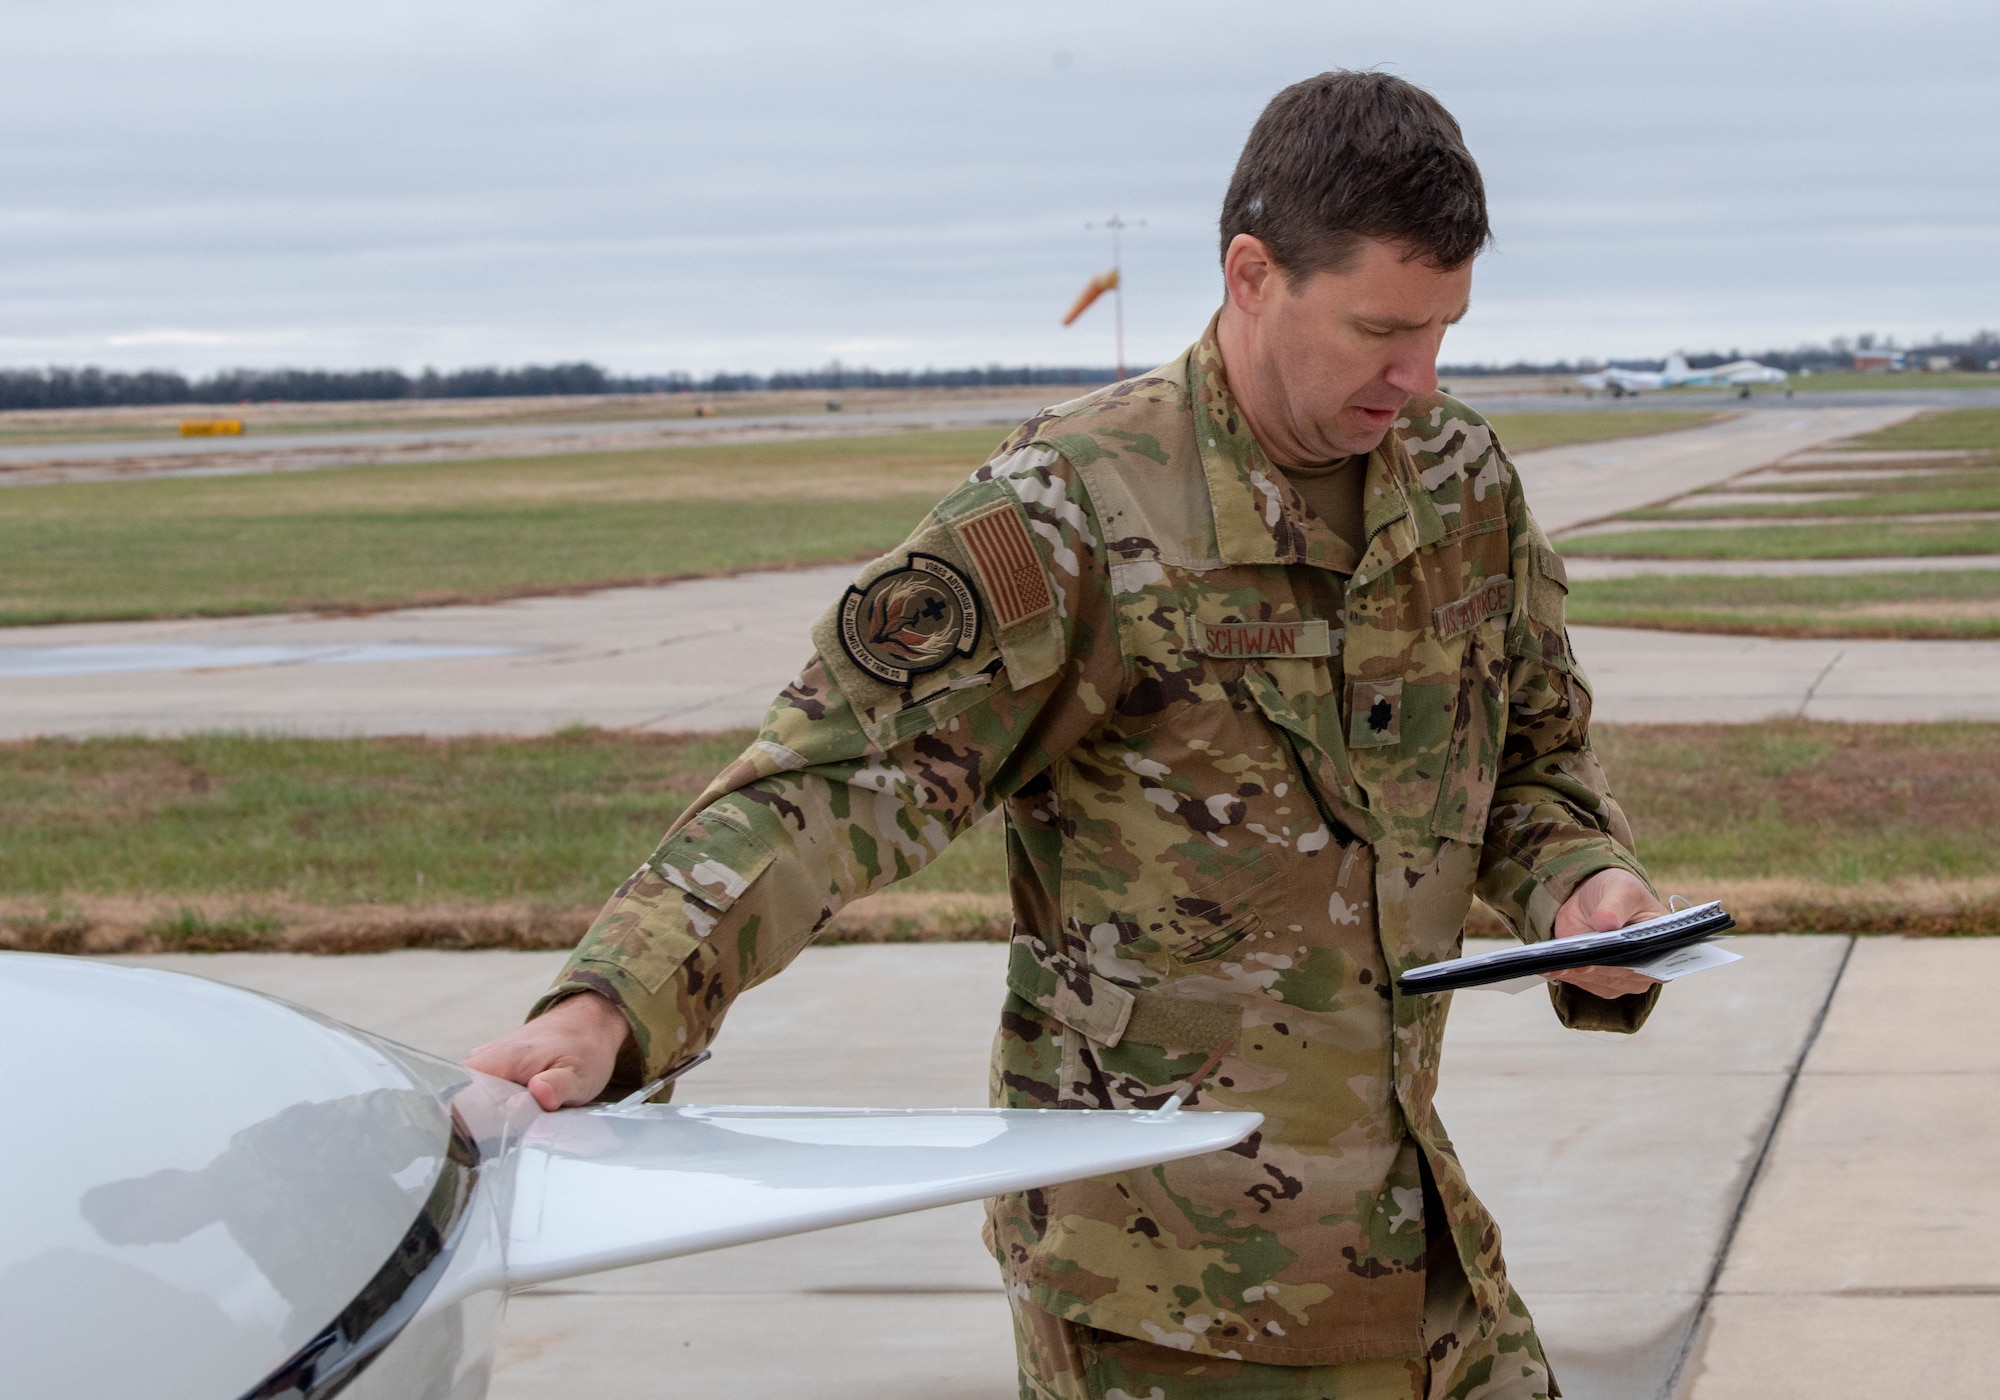 Lt. Col Michael Schwan, performs a pre-flight inspection Nov. 10, 2020, at Newton City Airport, Newton, Kansas. Inspections are performed on all aircraft before each flight to ensure the safety and correct operation of the aircraft. (U.S. Air Force photo by Airman 1st Class Zachary Willis)